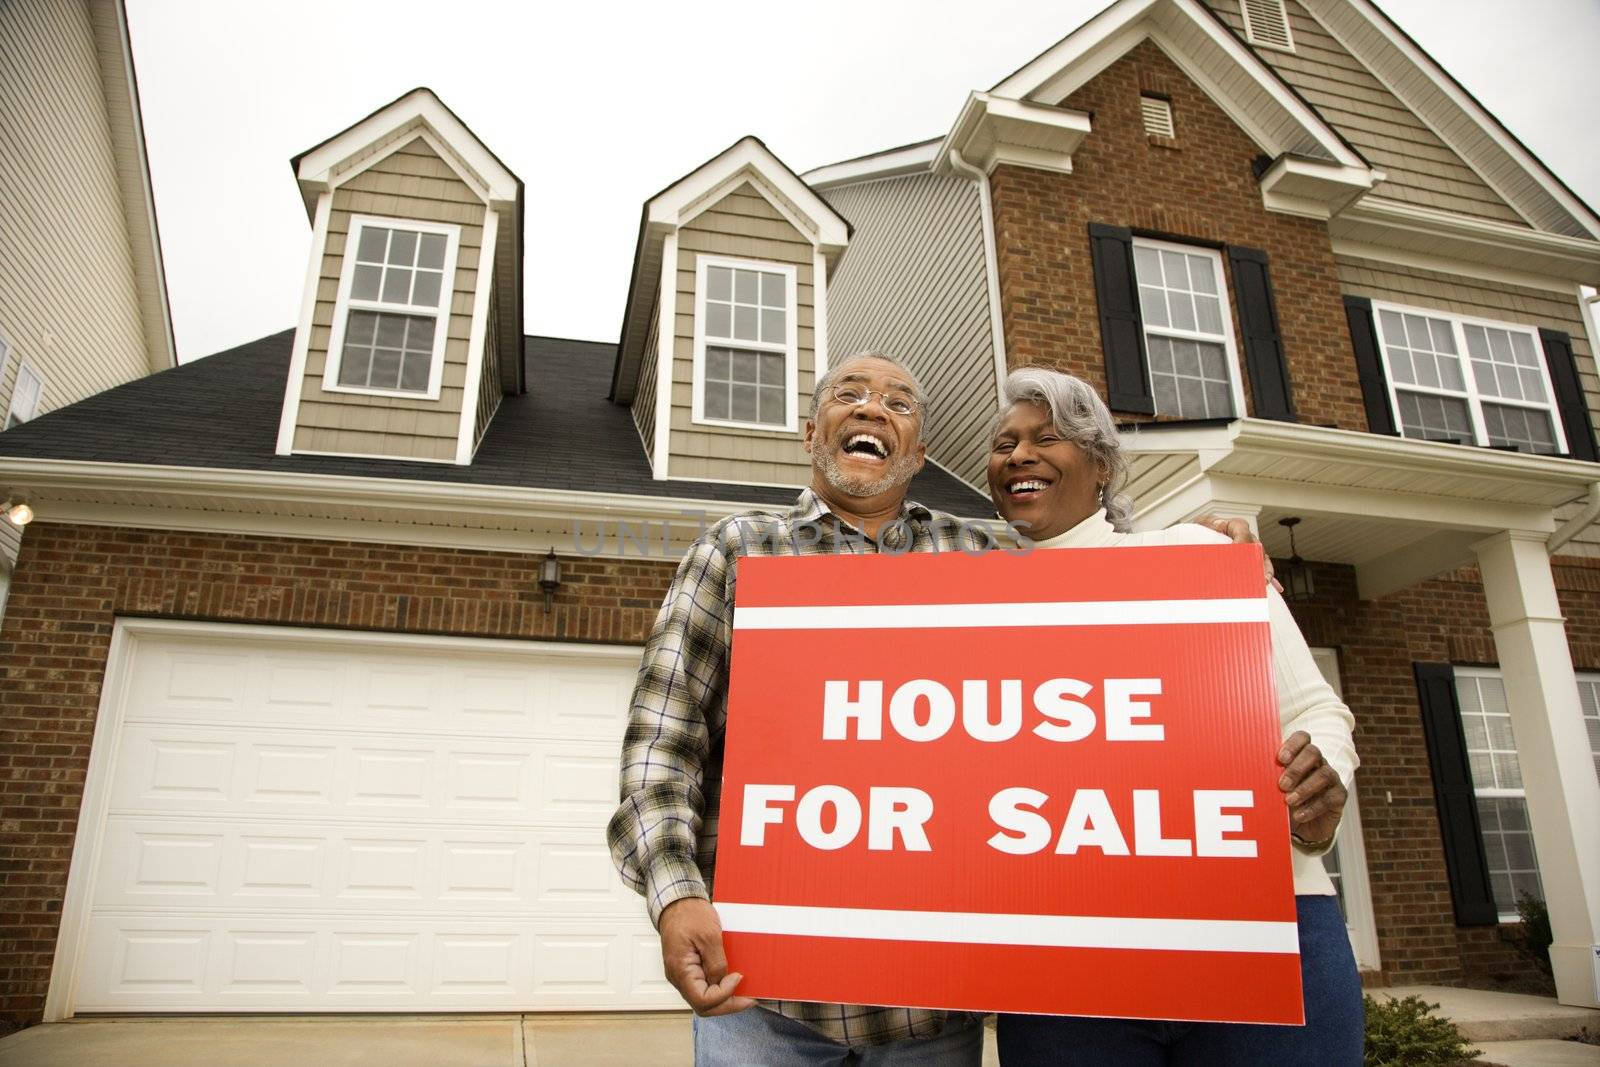 Portrait of middle-aged African-American couple outside house with for sale sign.